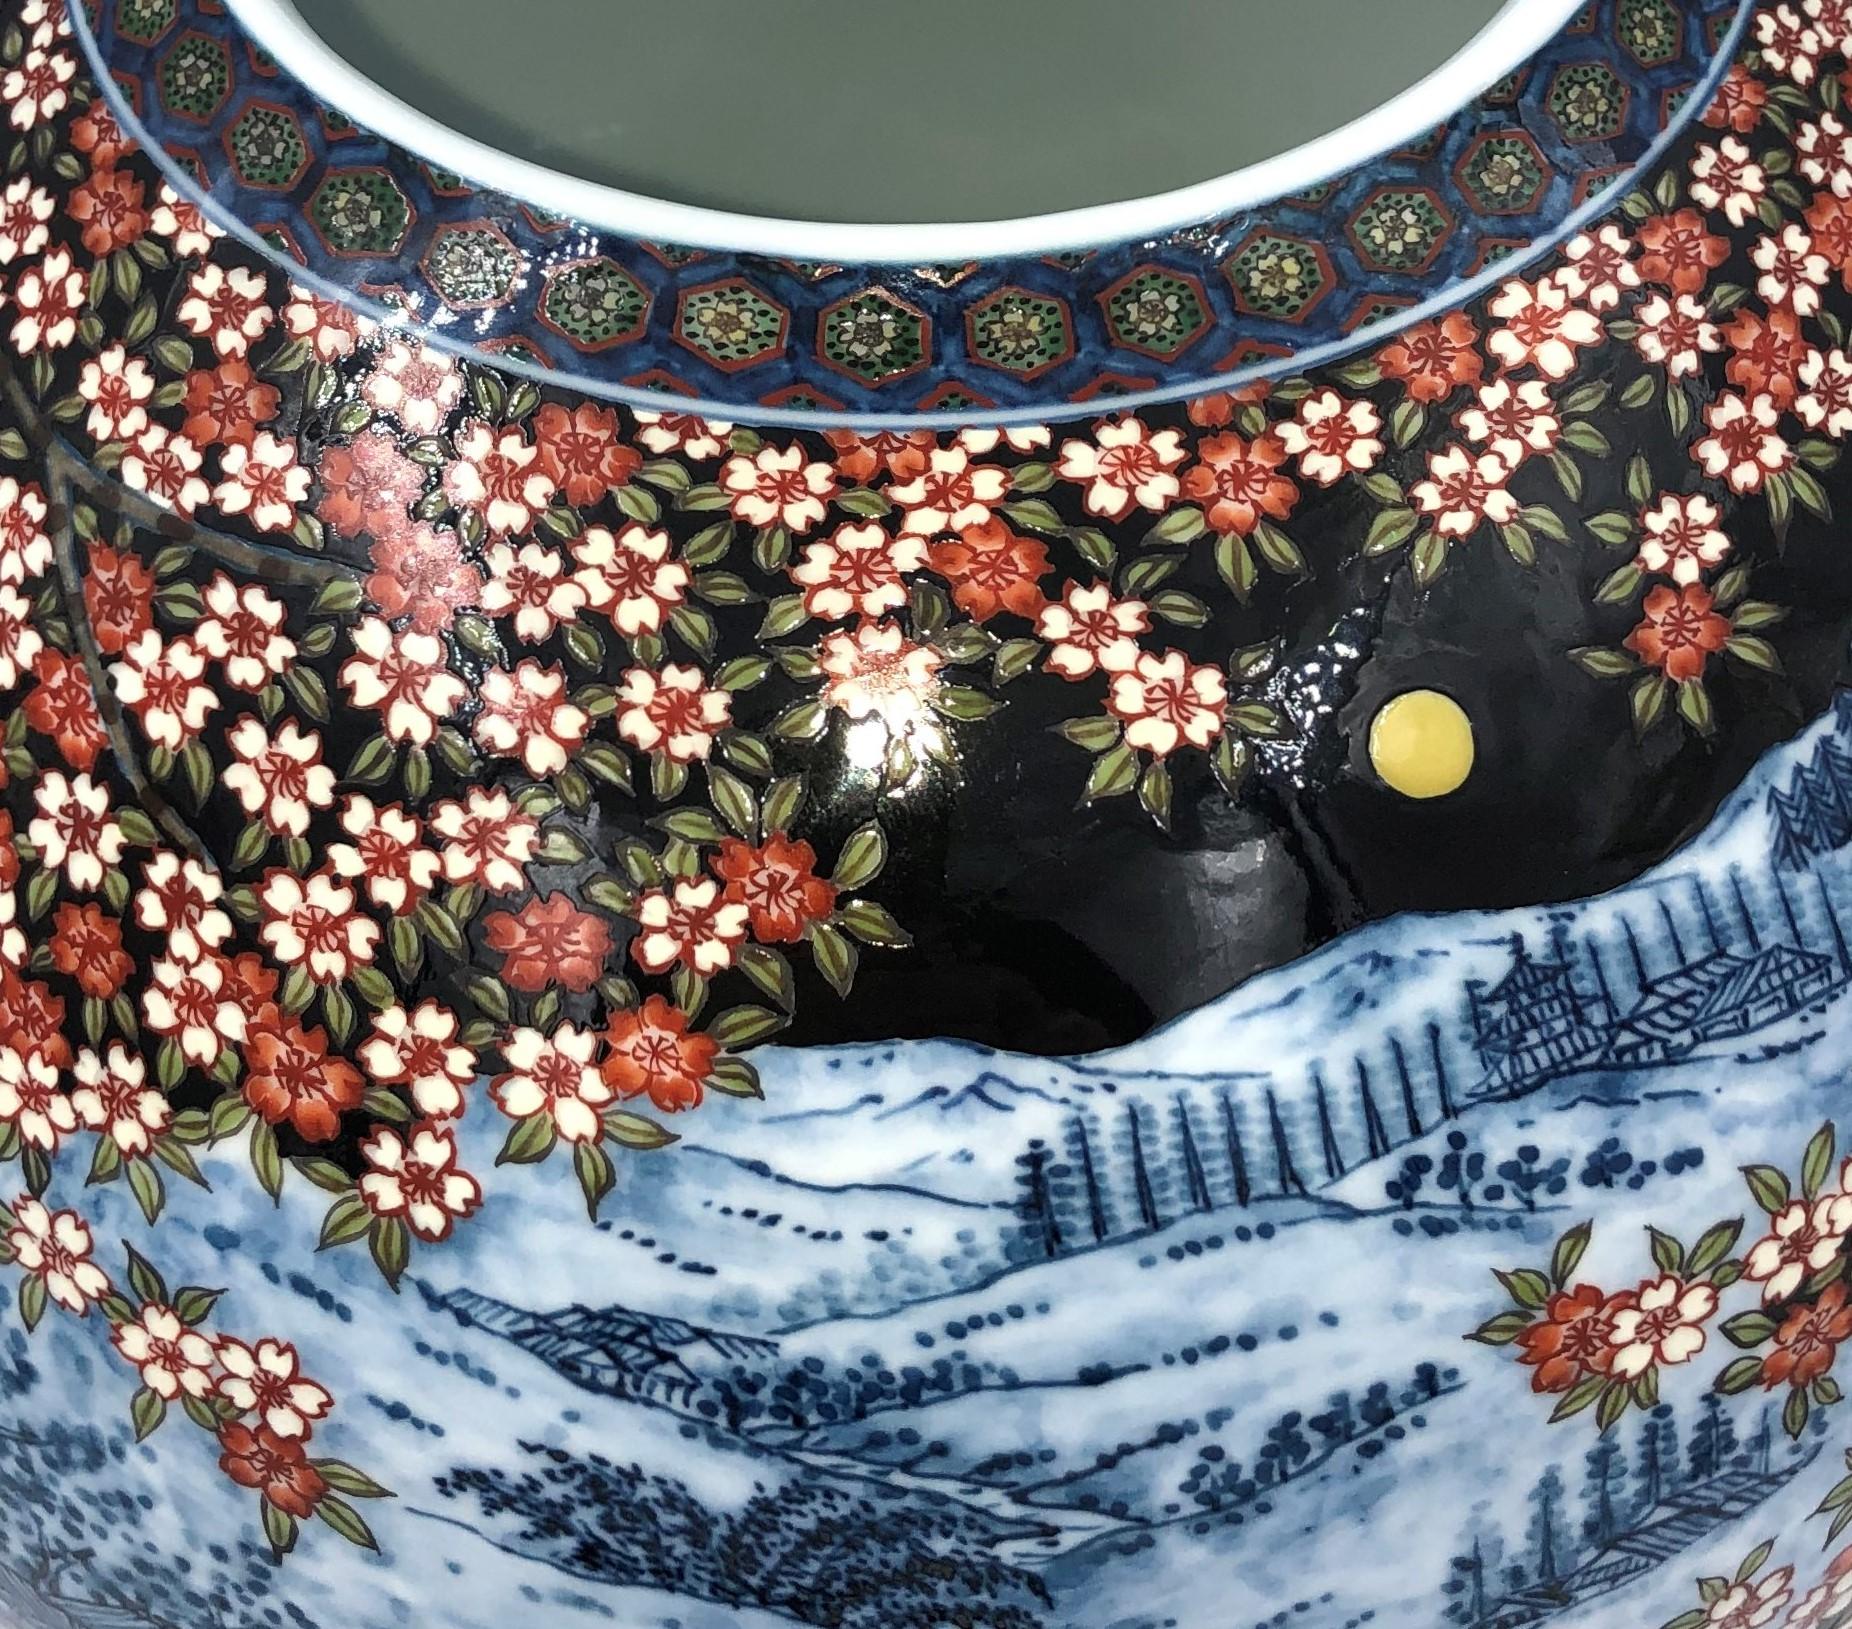 Mesmerizing Japanese contemporary museum-quality decorative porcelain vase, painstakingly intricately hand painted in black, blue and red Set against a stunning globular background in black , a signed masterpiece by second-generation master